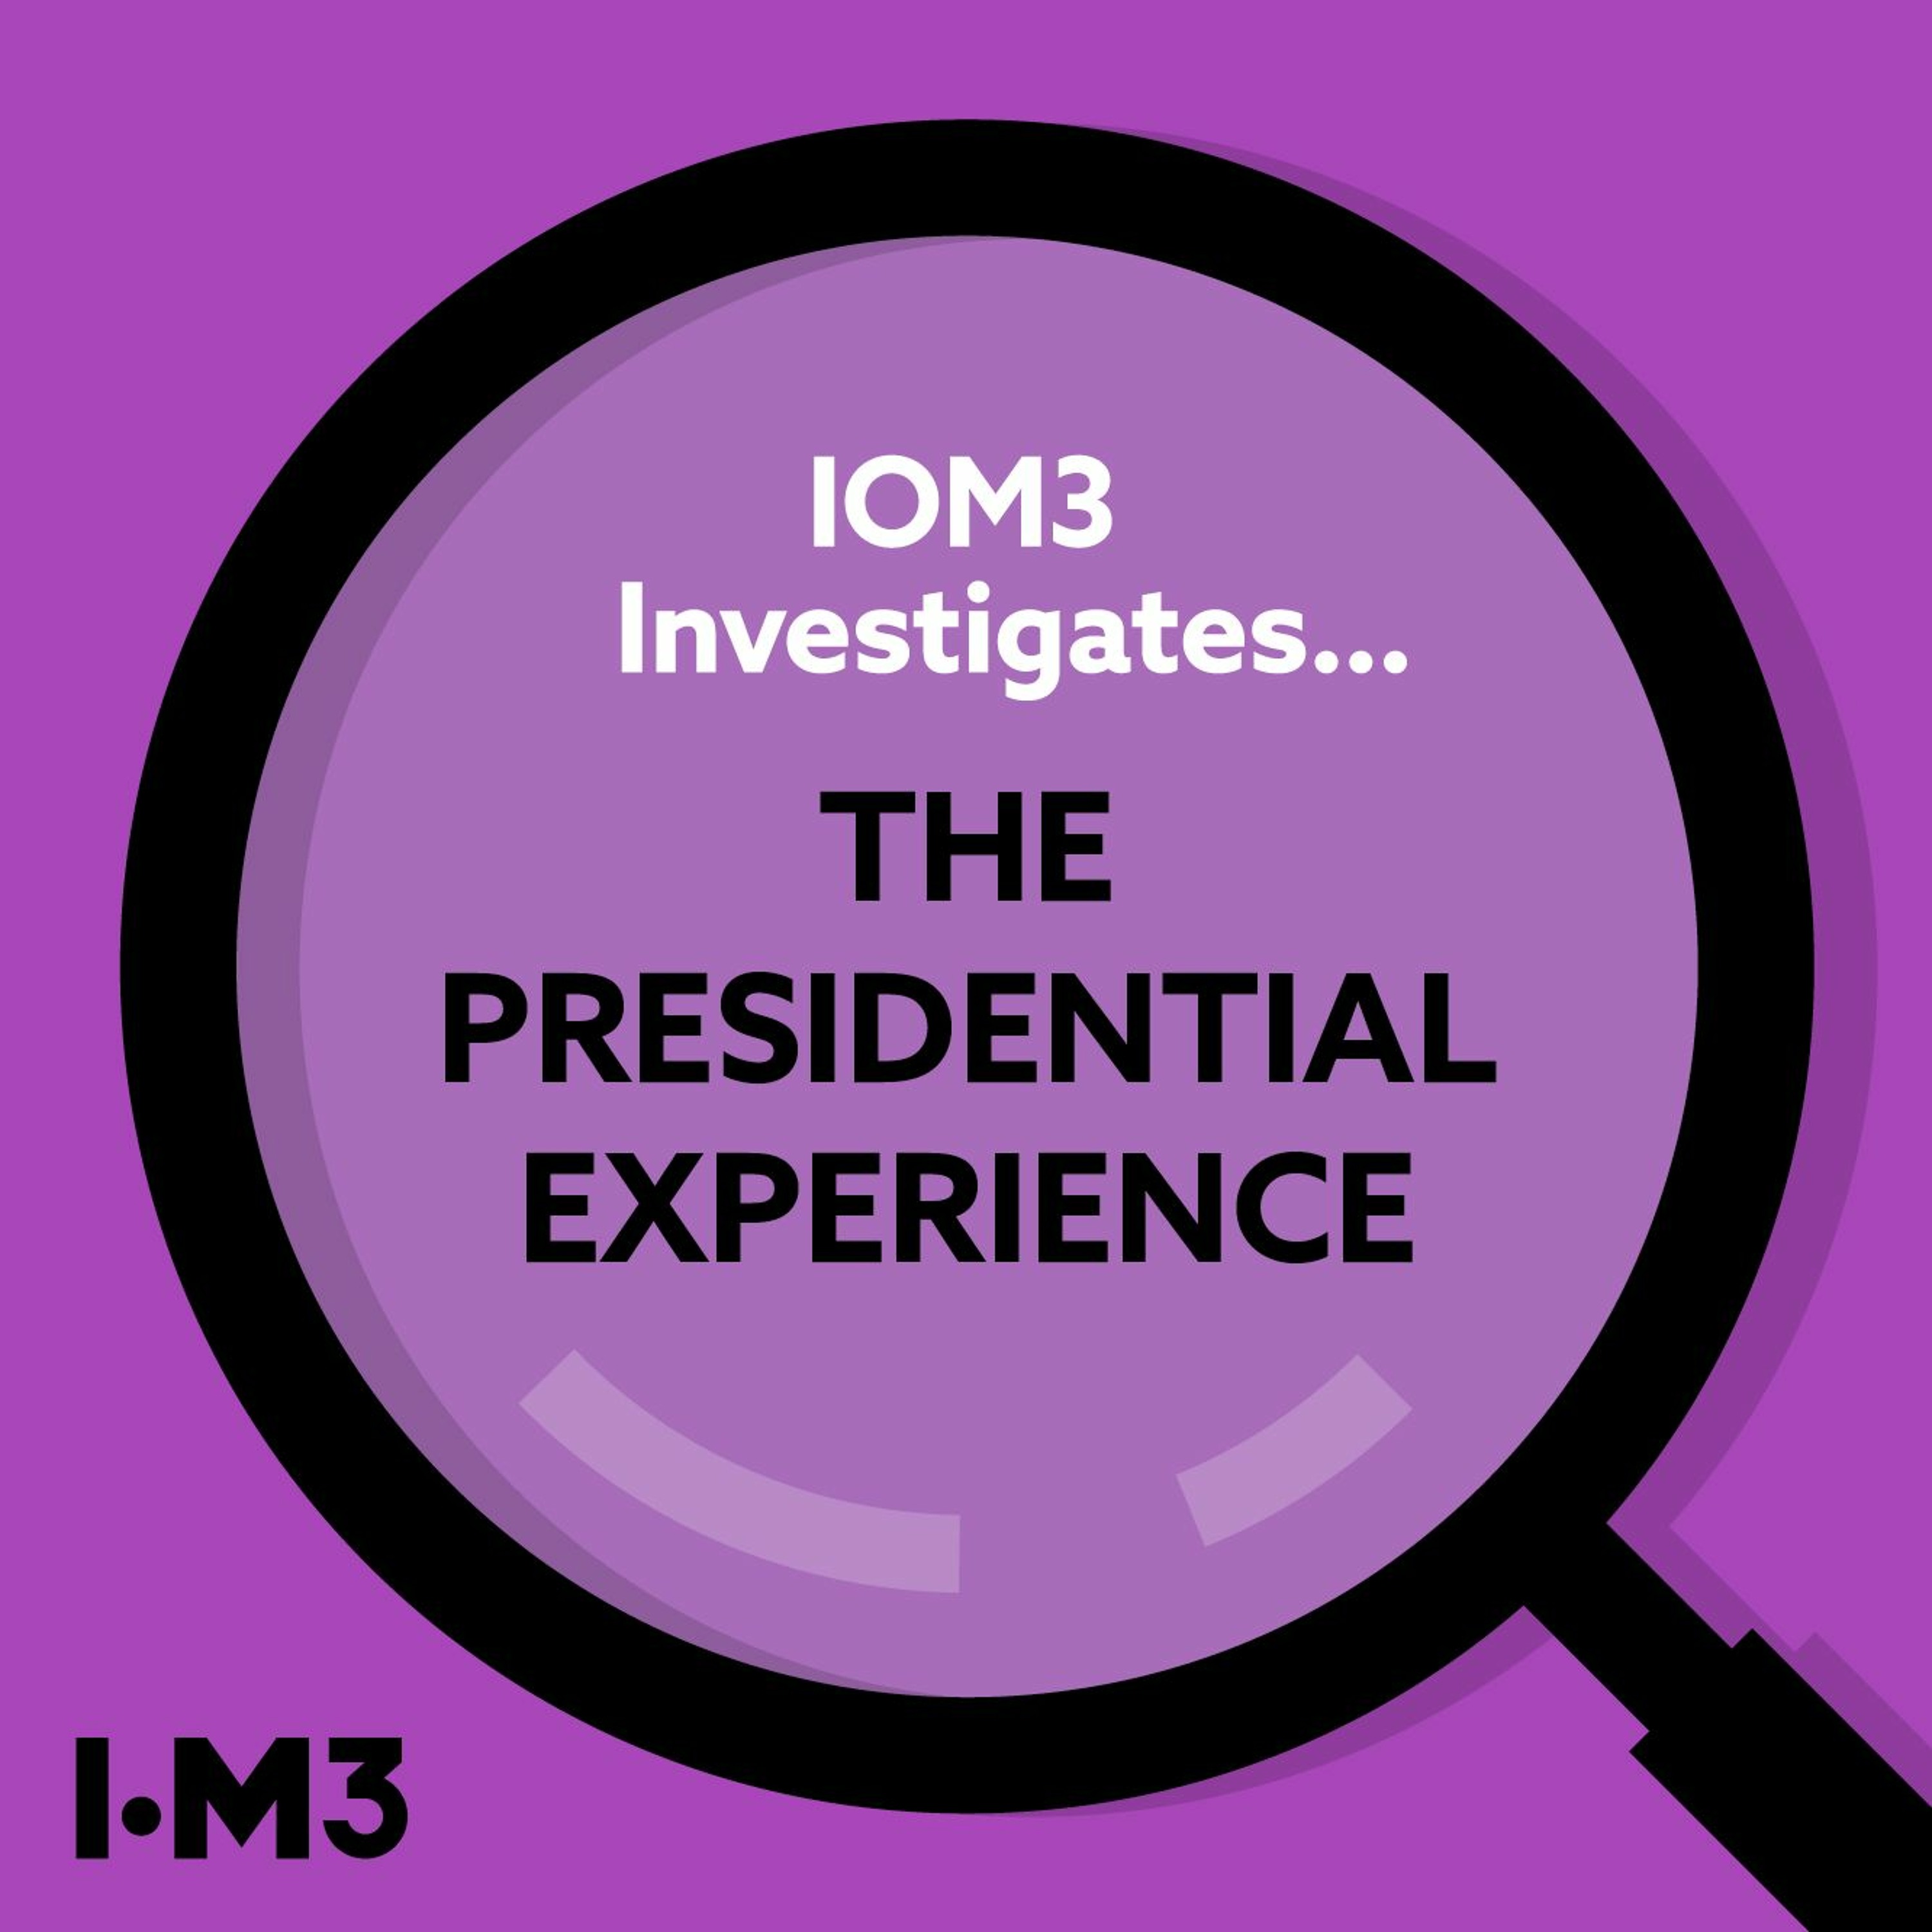 IOM3 Investigates... the Presidential experience